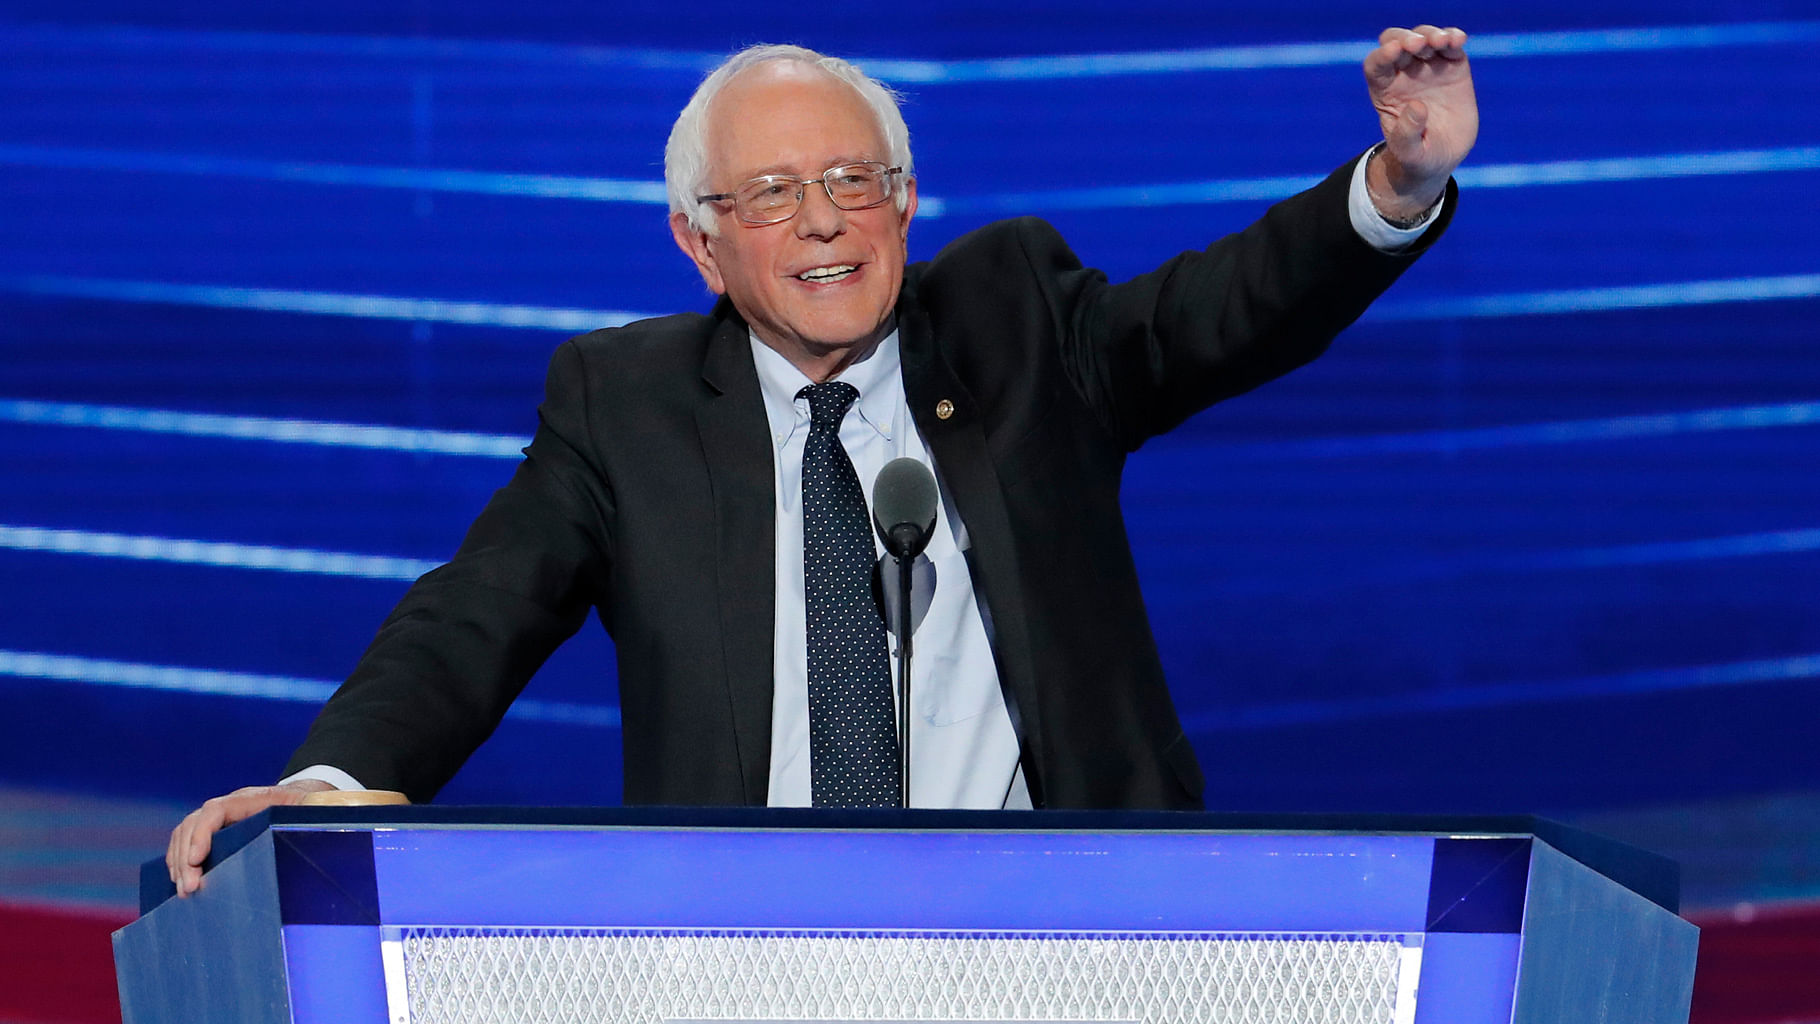 

Former Democratic presidential candidate Bernie Sanders waves to delegates  during the first day of the Democratic National Convention in Philadelphia. (Photo: AP)